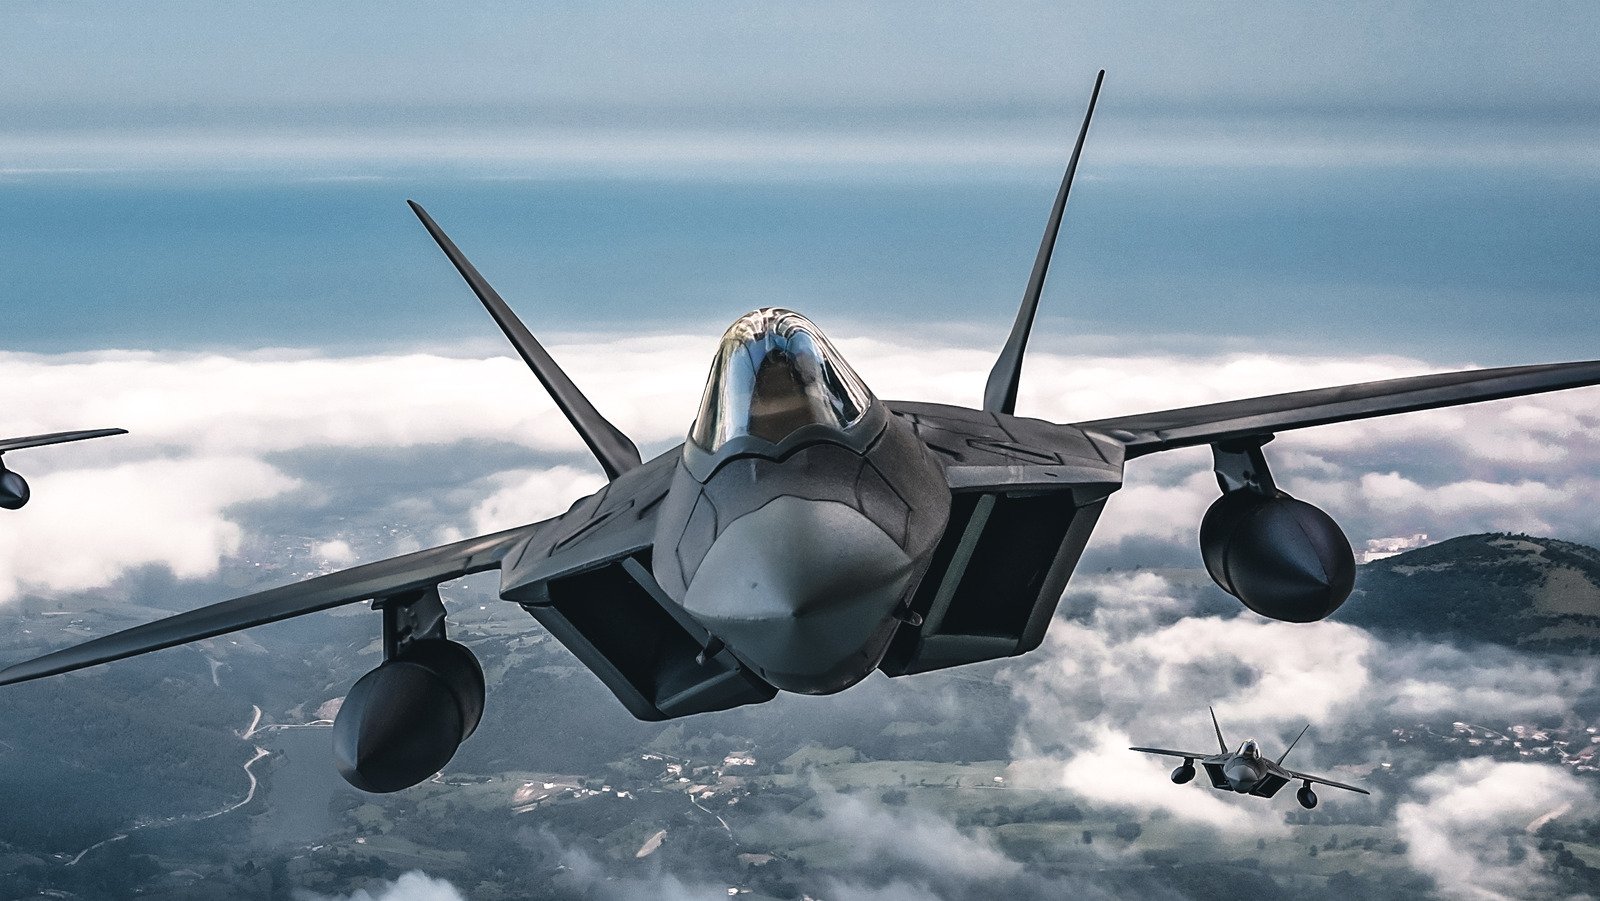 12 Of The Fastest Fighter Jets In The World, Ranked